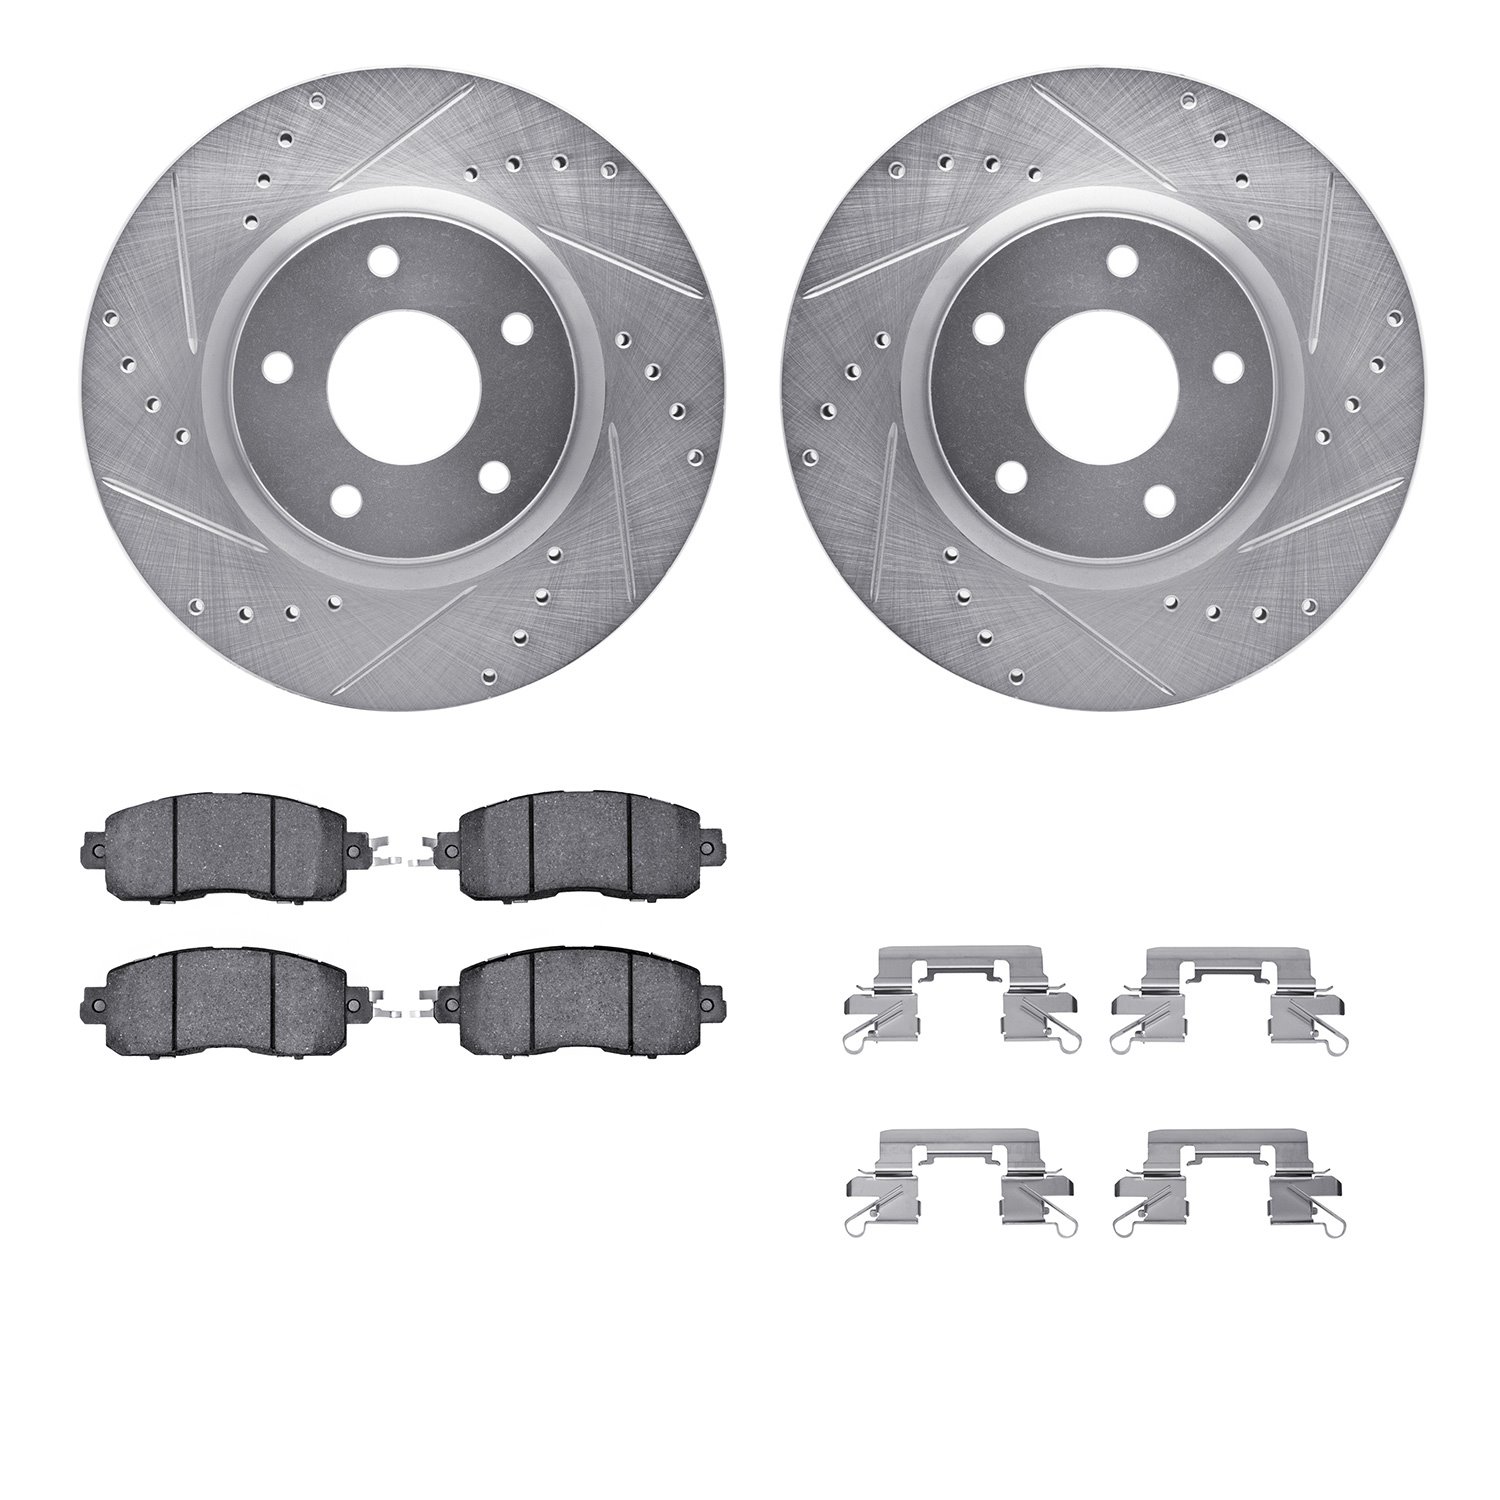 7512-67073 Drilled/Slotted Brake Rotors w/5000 Advanced Brake Pads Kit & Hardware [Silver], Fits Select Infiniti/Nissan, Positio